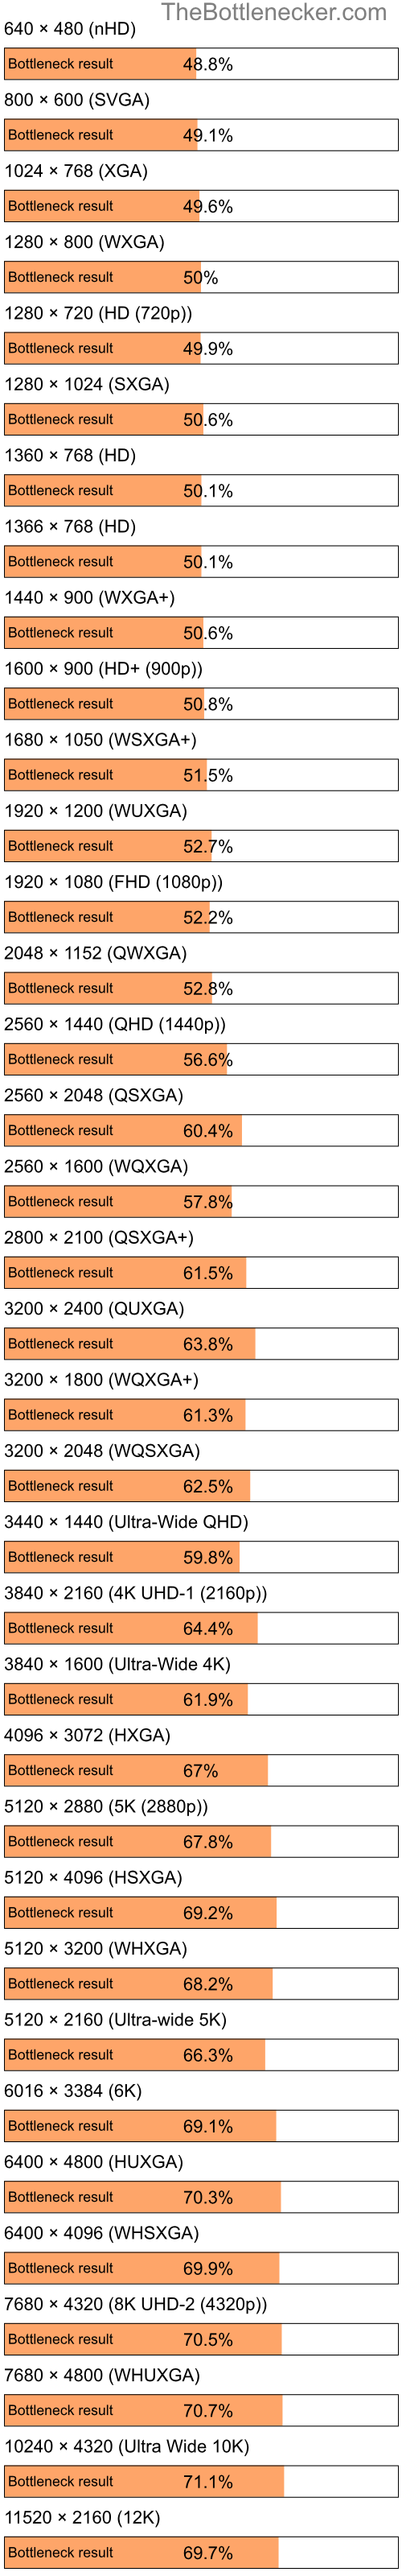 Bottleneck results by resolution for Intel Pentium 4 and NVIDIA GeForce 9400M in Processor Intense Tasks